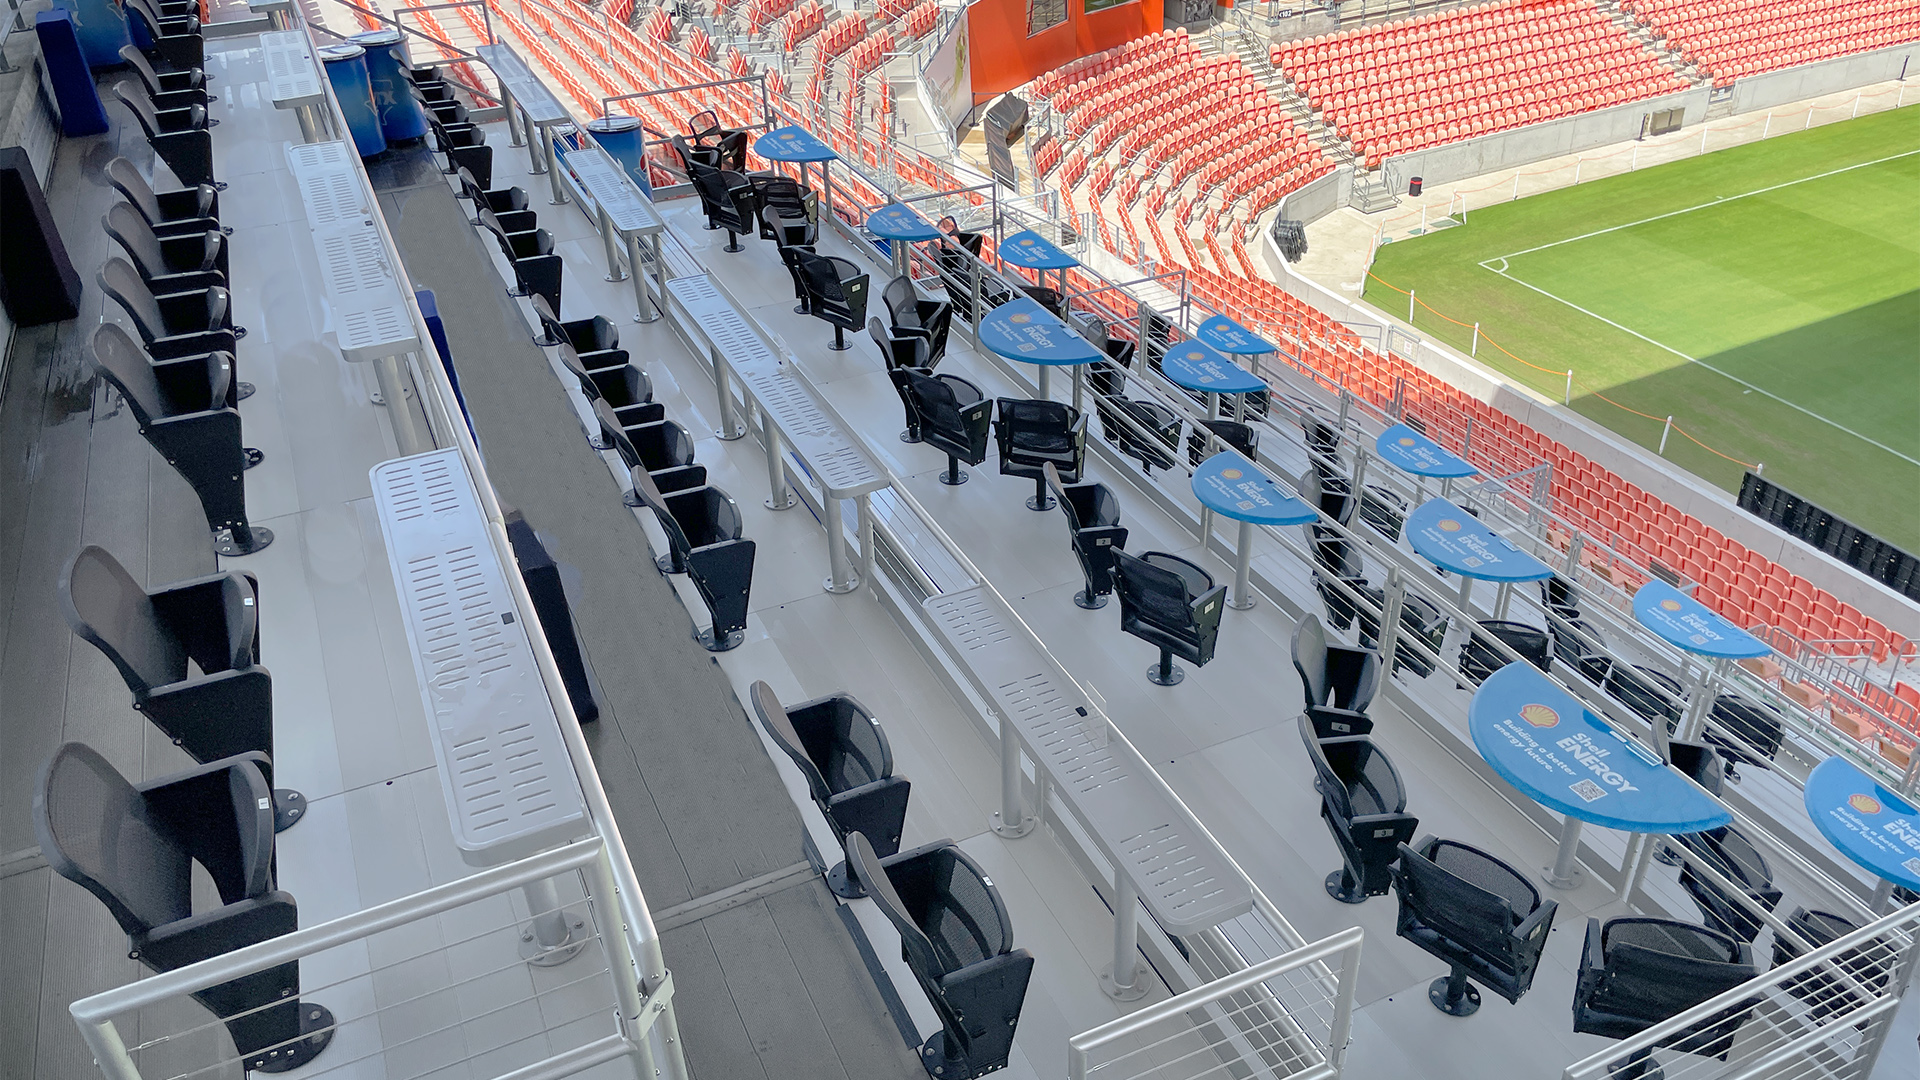 Houston Dynamo Stadium featuring a number of 4Topps Products including 4Topps Loge